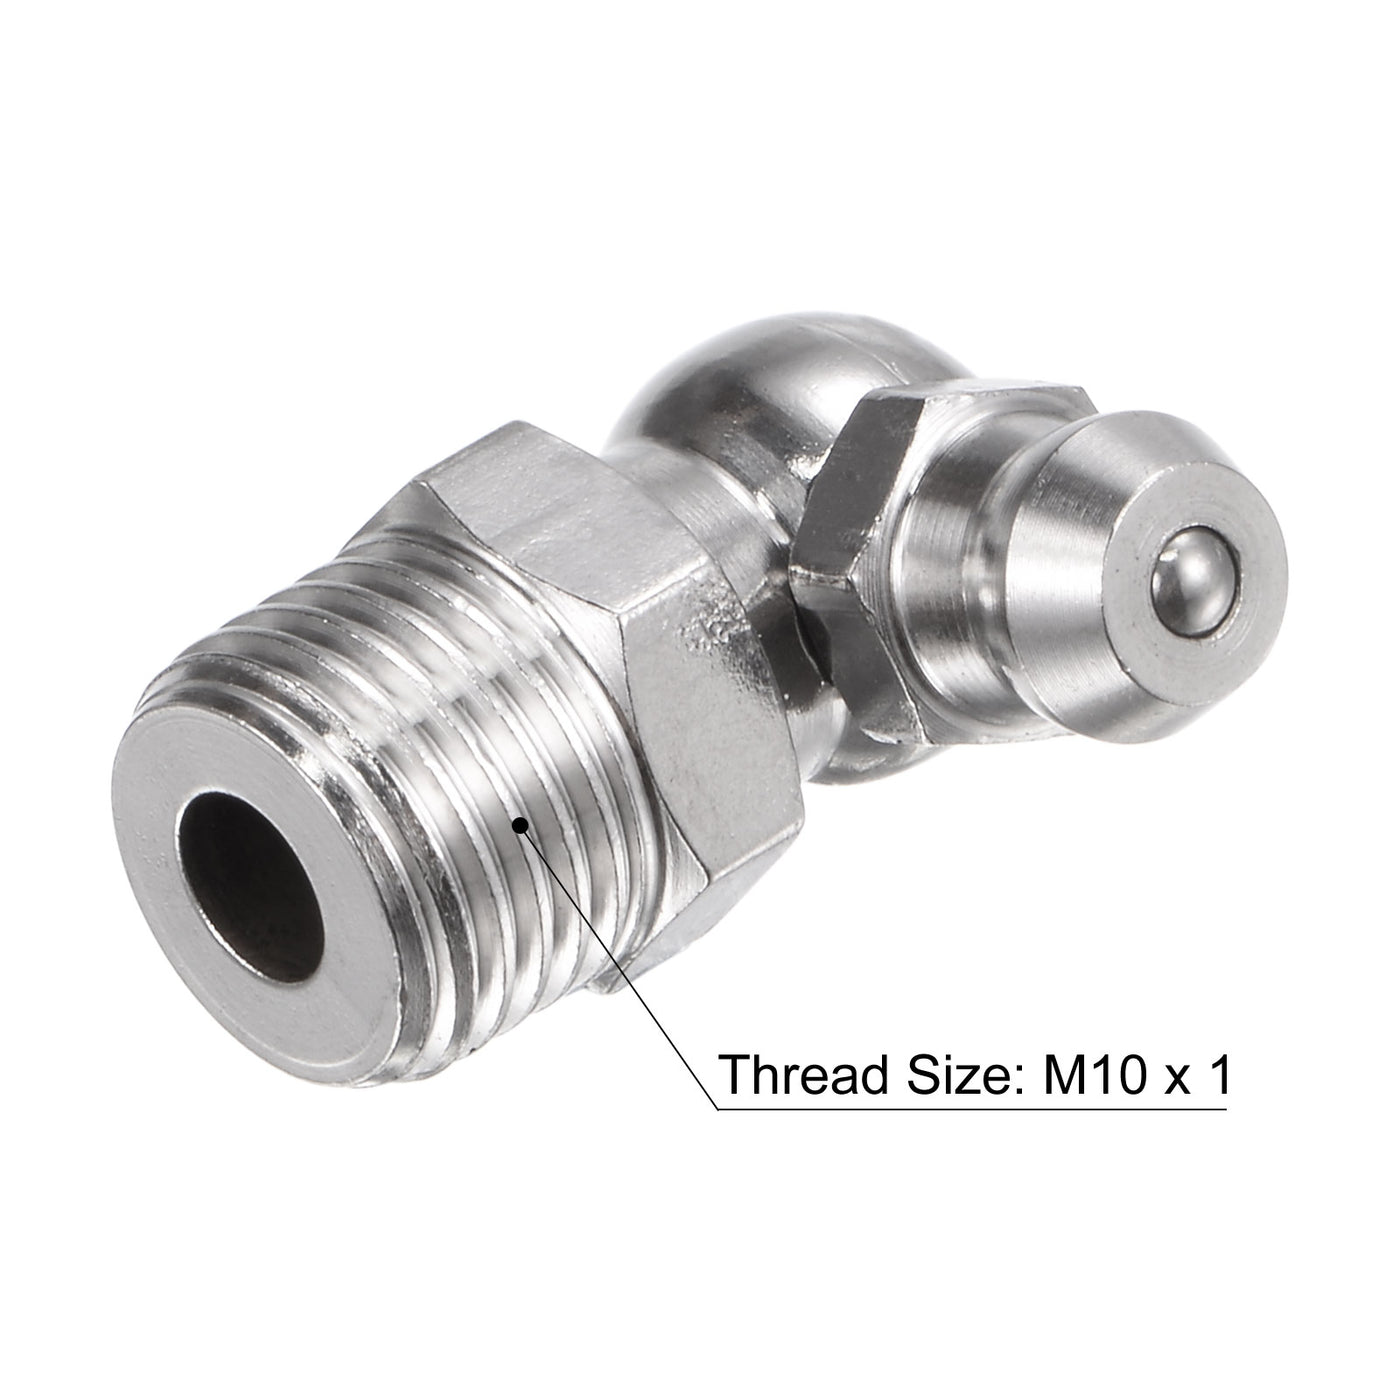 Uxcell Uxcell 304 Stainless Steel 90 Degree Hydraulic Grease Fitting M10 x 1mm Thread, 2Pcs